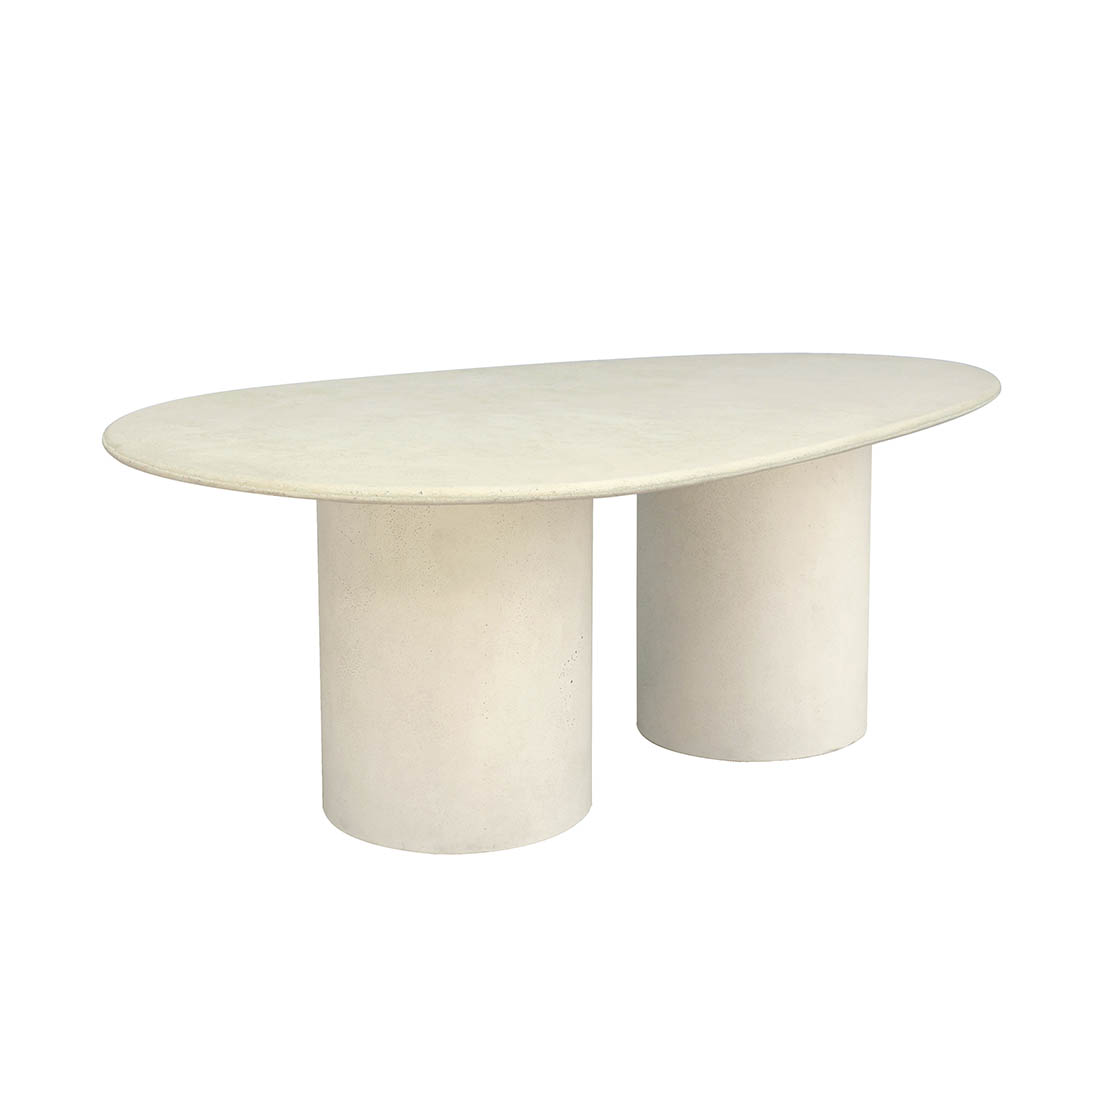 Petra Curve Dining Table image 5